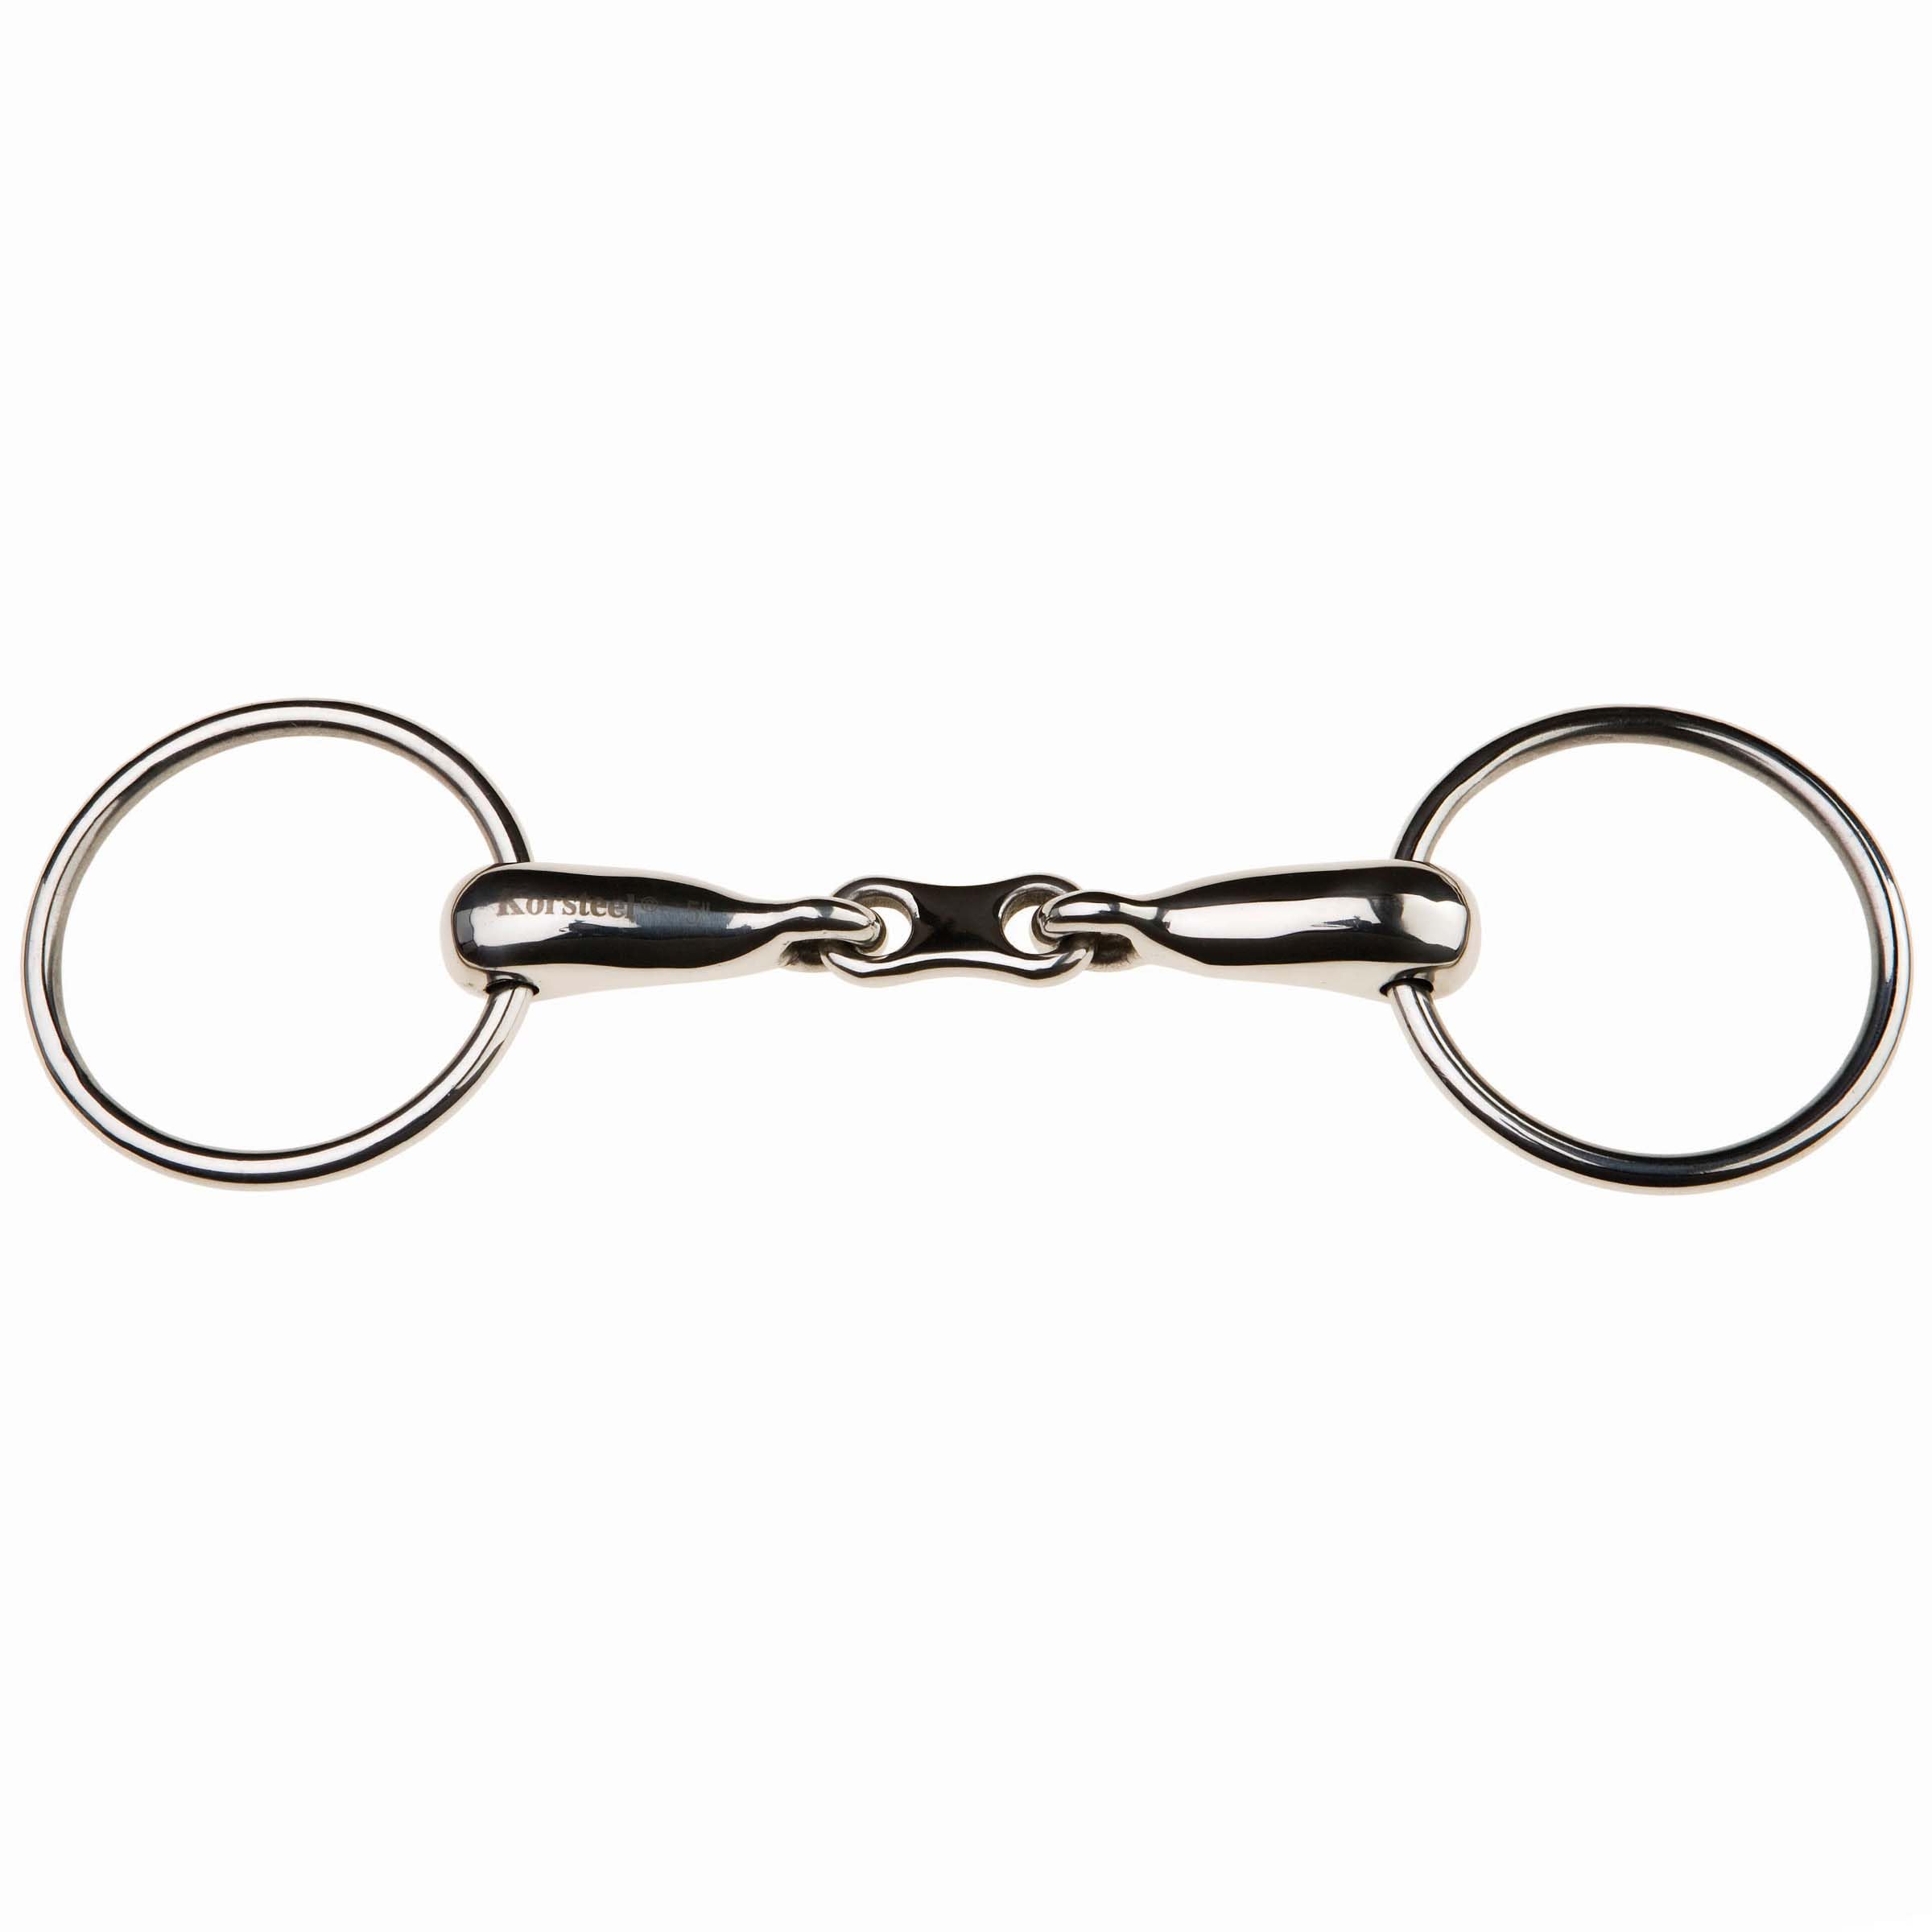 korsteel Hohl Mund Loose Ring French Link Snaffle, N/A 15,2 cm